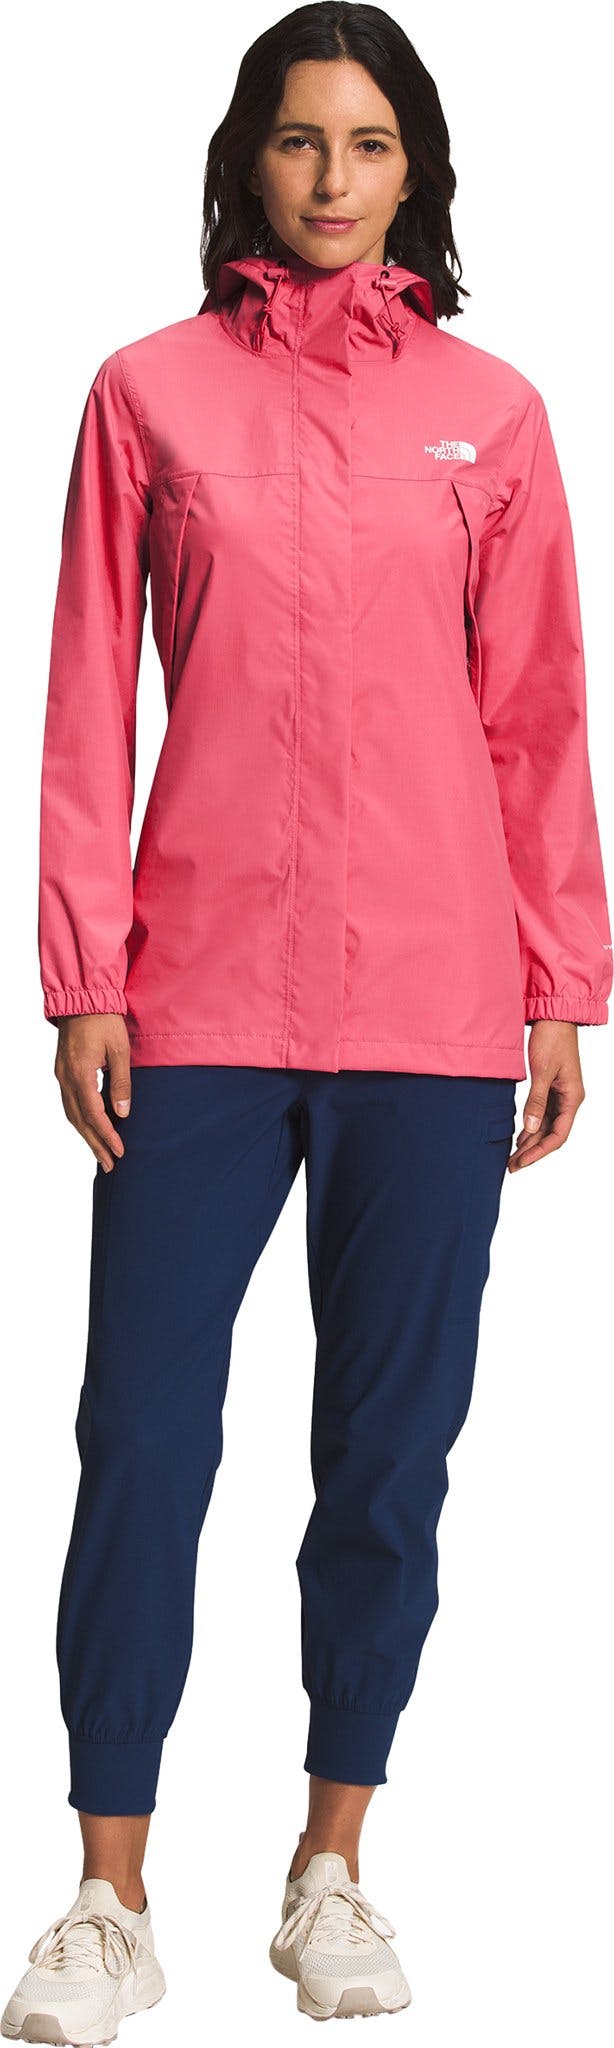 Product image for Antora Parka - Women's